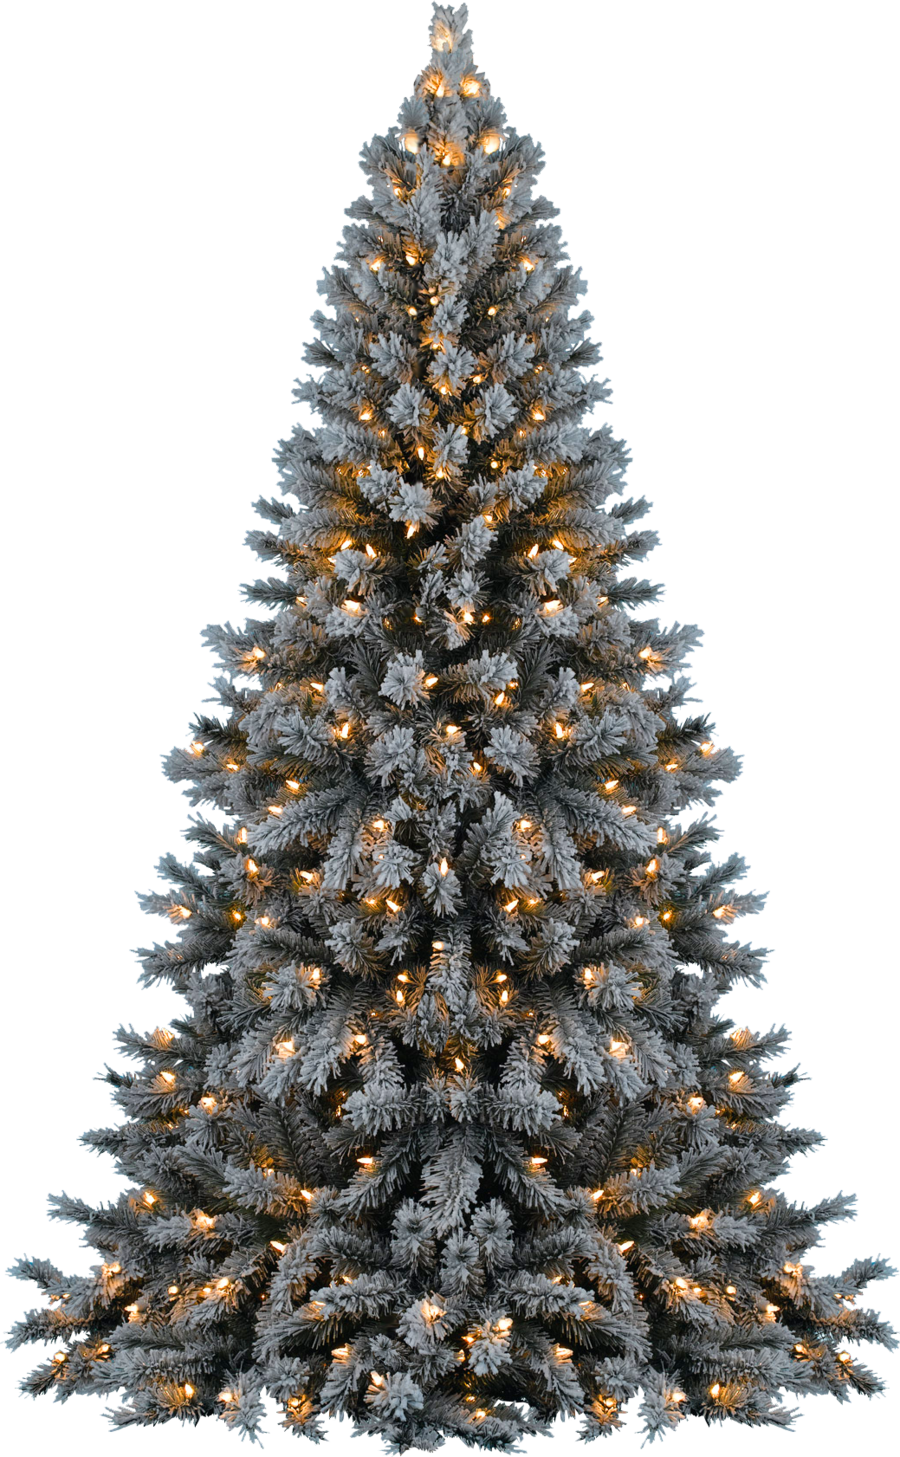 Download PNG image - Christmas Tree PNG Transparent 